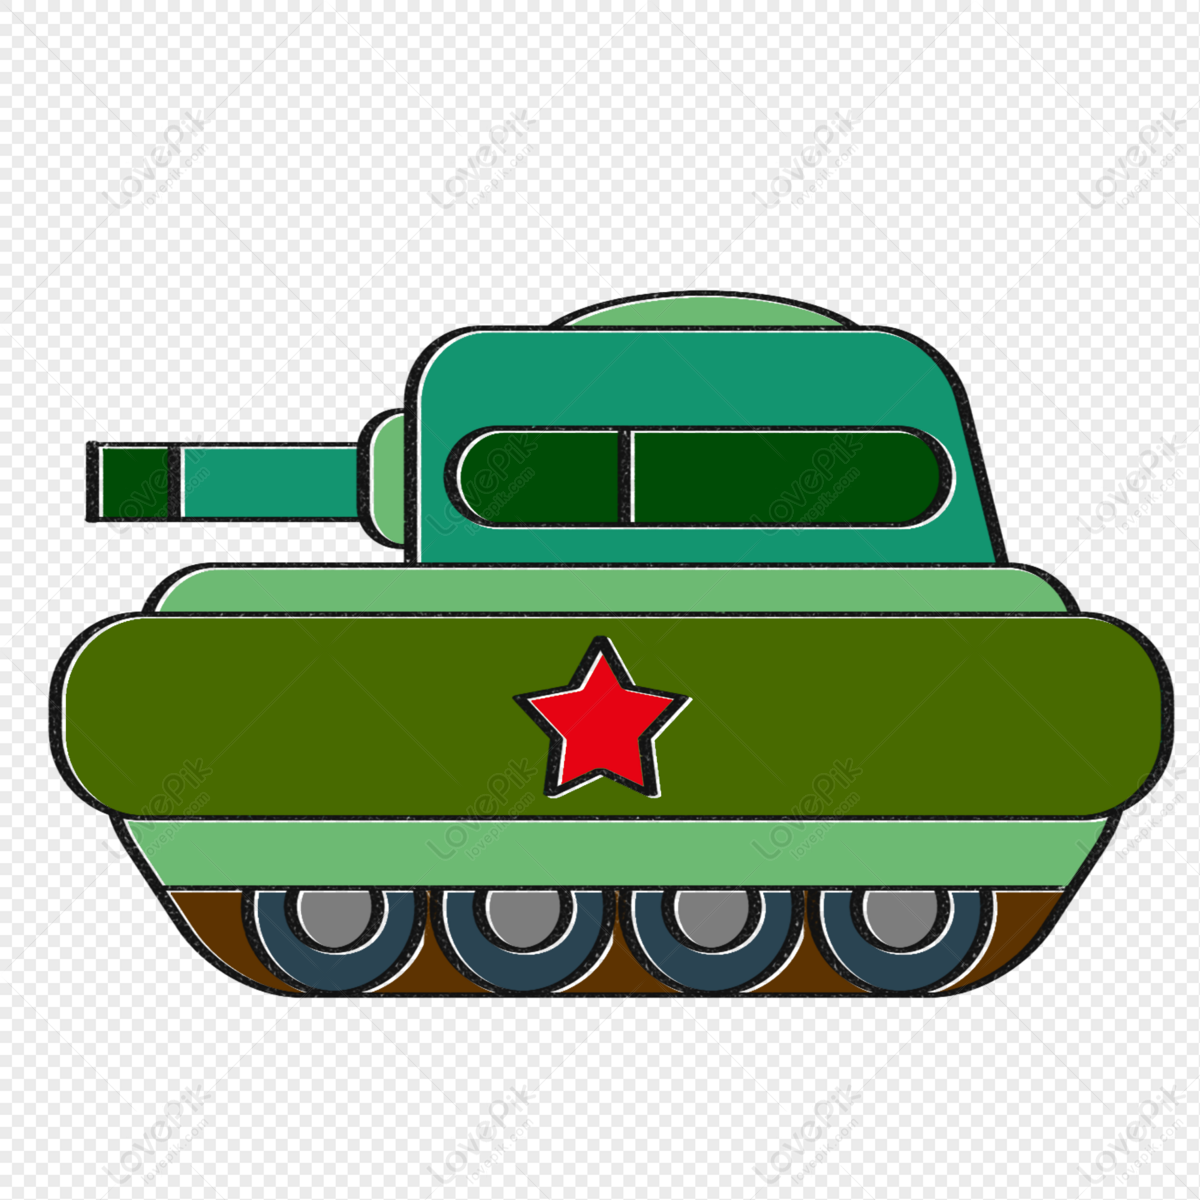 Tank PNG Images With Transparent Background